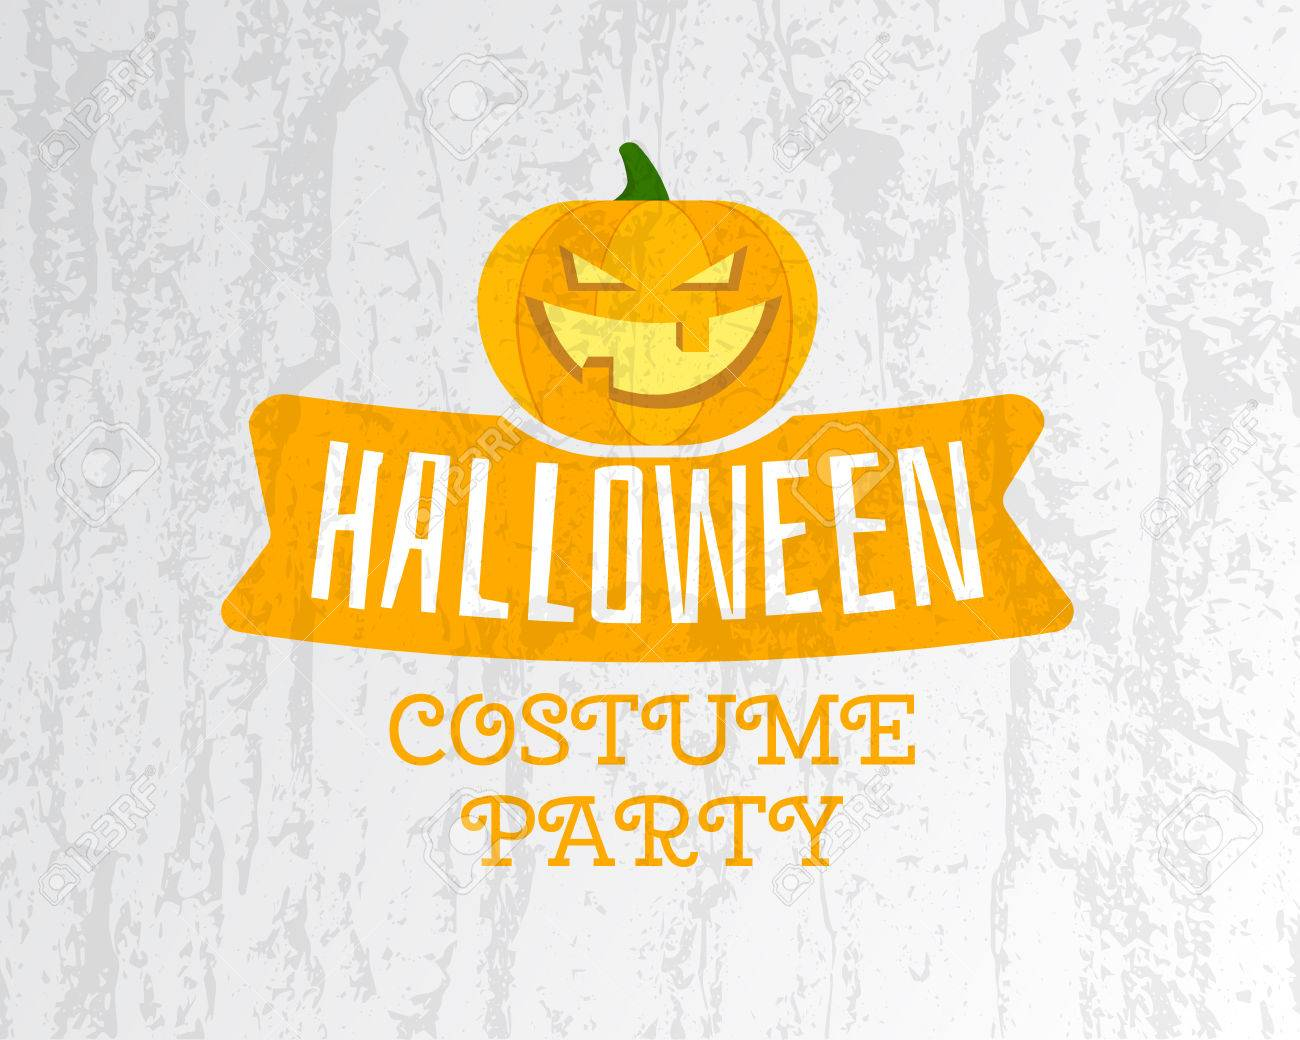 Happy Halloween Costume Party Flyer Template – Orange And White.